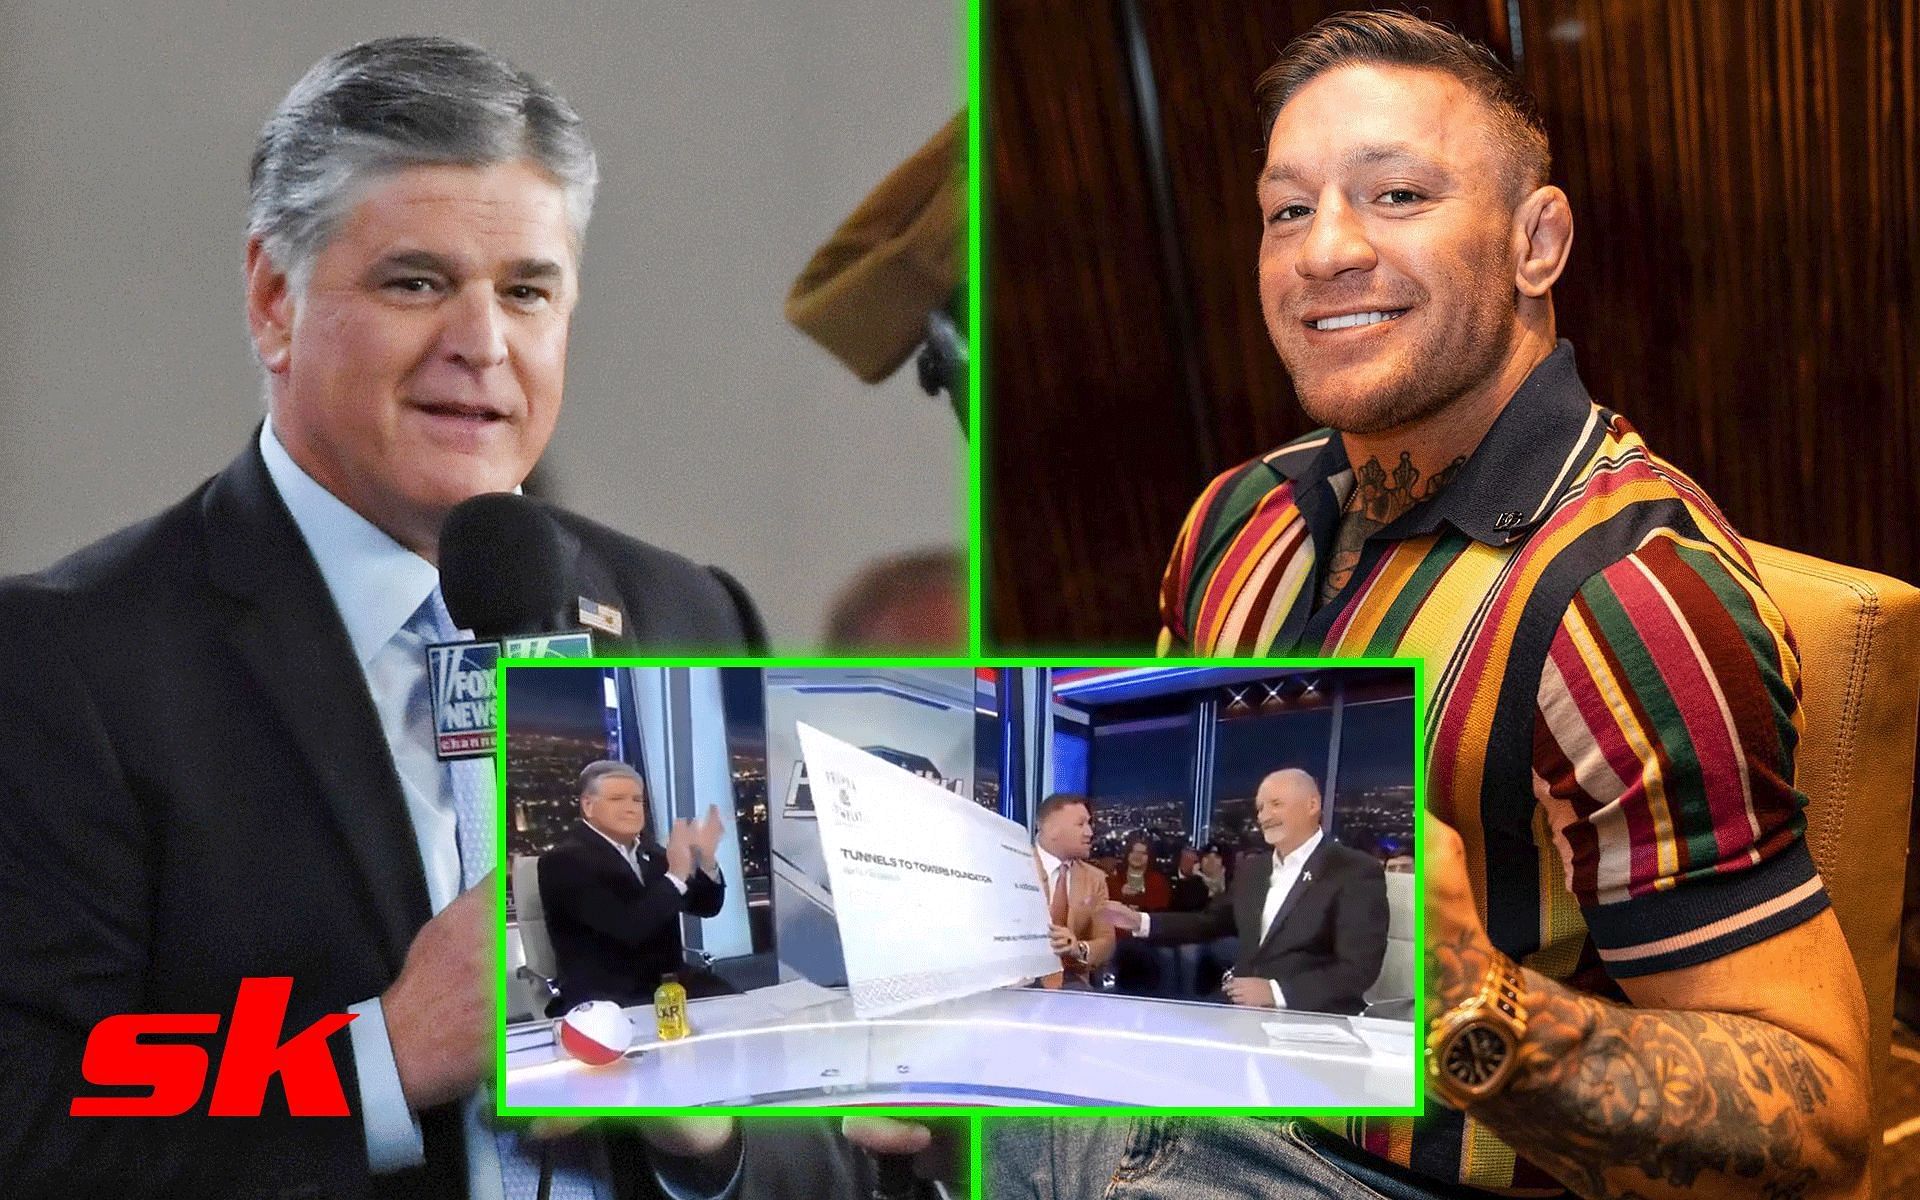 Conor McGregor donates $1M to Tunnel to Towers Foundation [Images via: @thenotoriousmma on Instagram and @jedigoodman on Twitter]